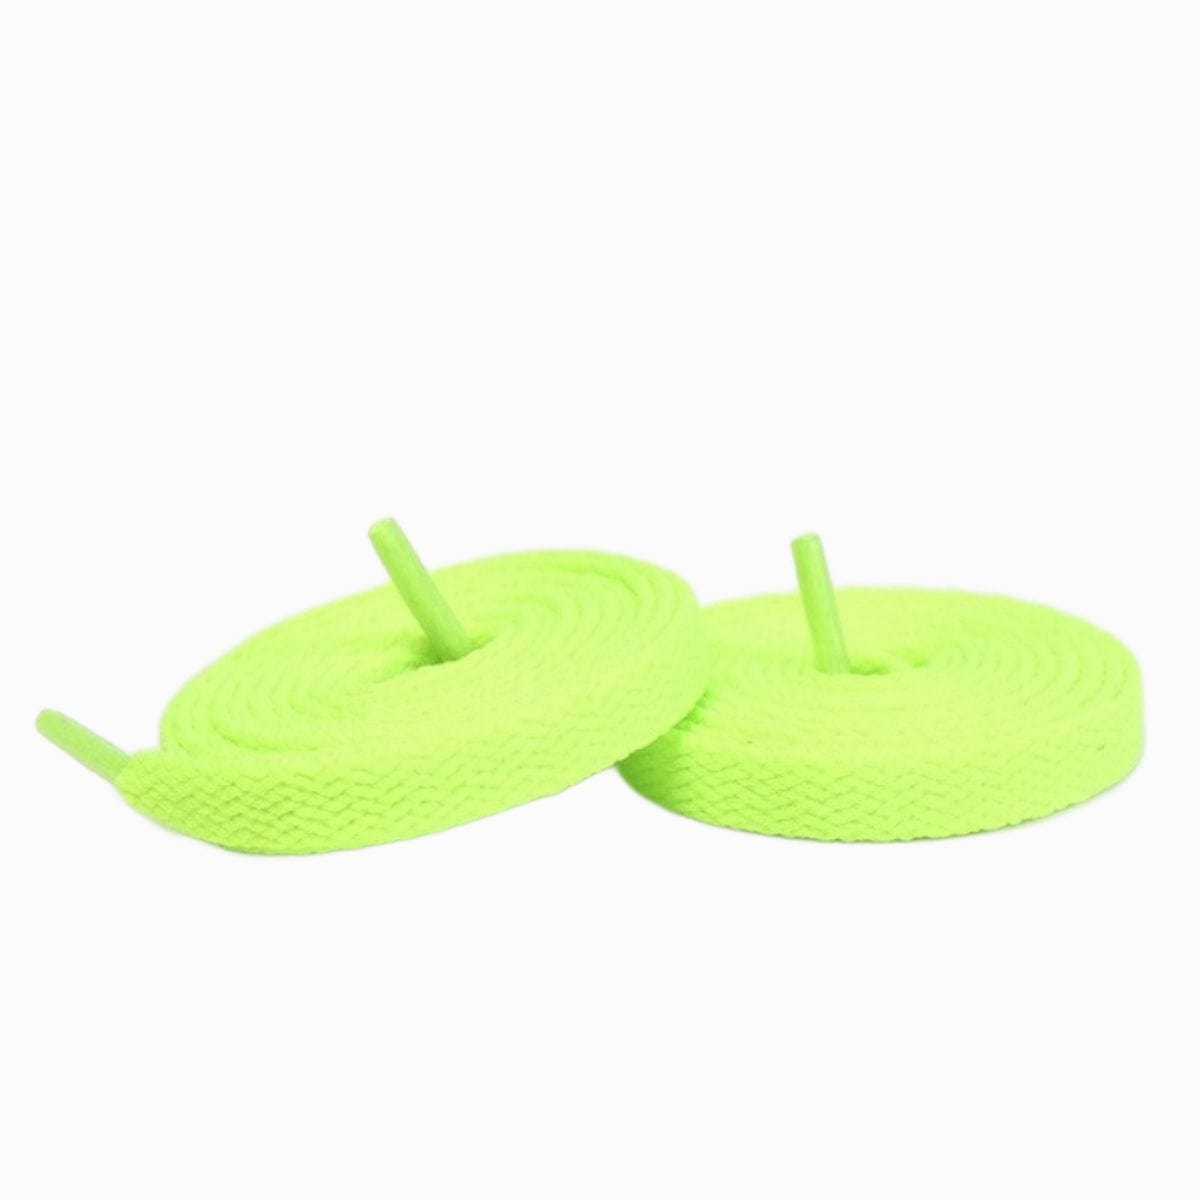 Fluorescent Green Replacement Shoe Laces for Adidas Handball Spezial Sneakers by Kicks Shoelaces